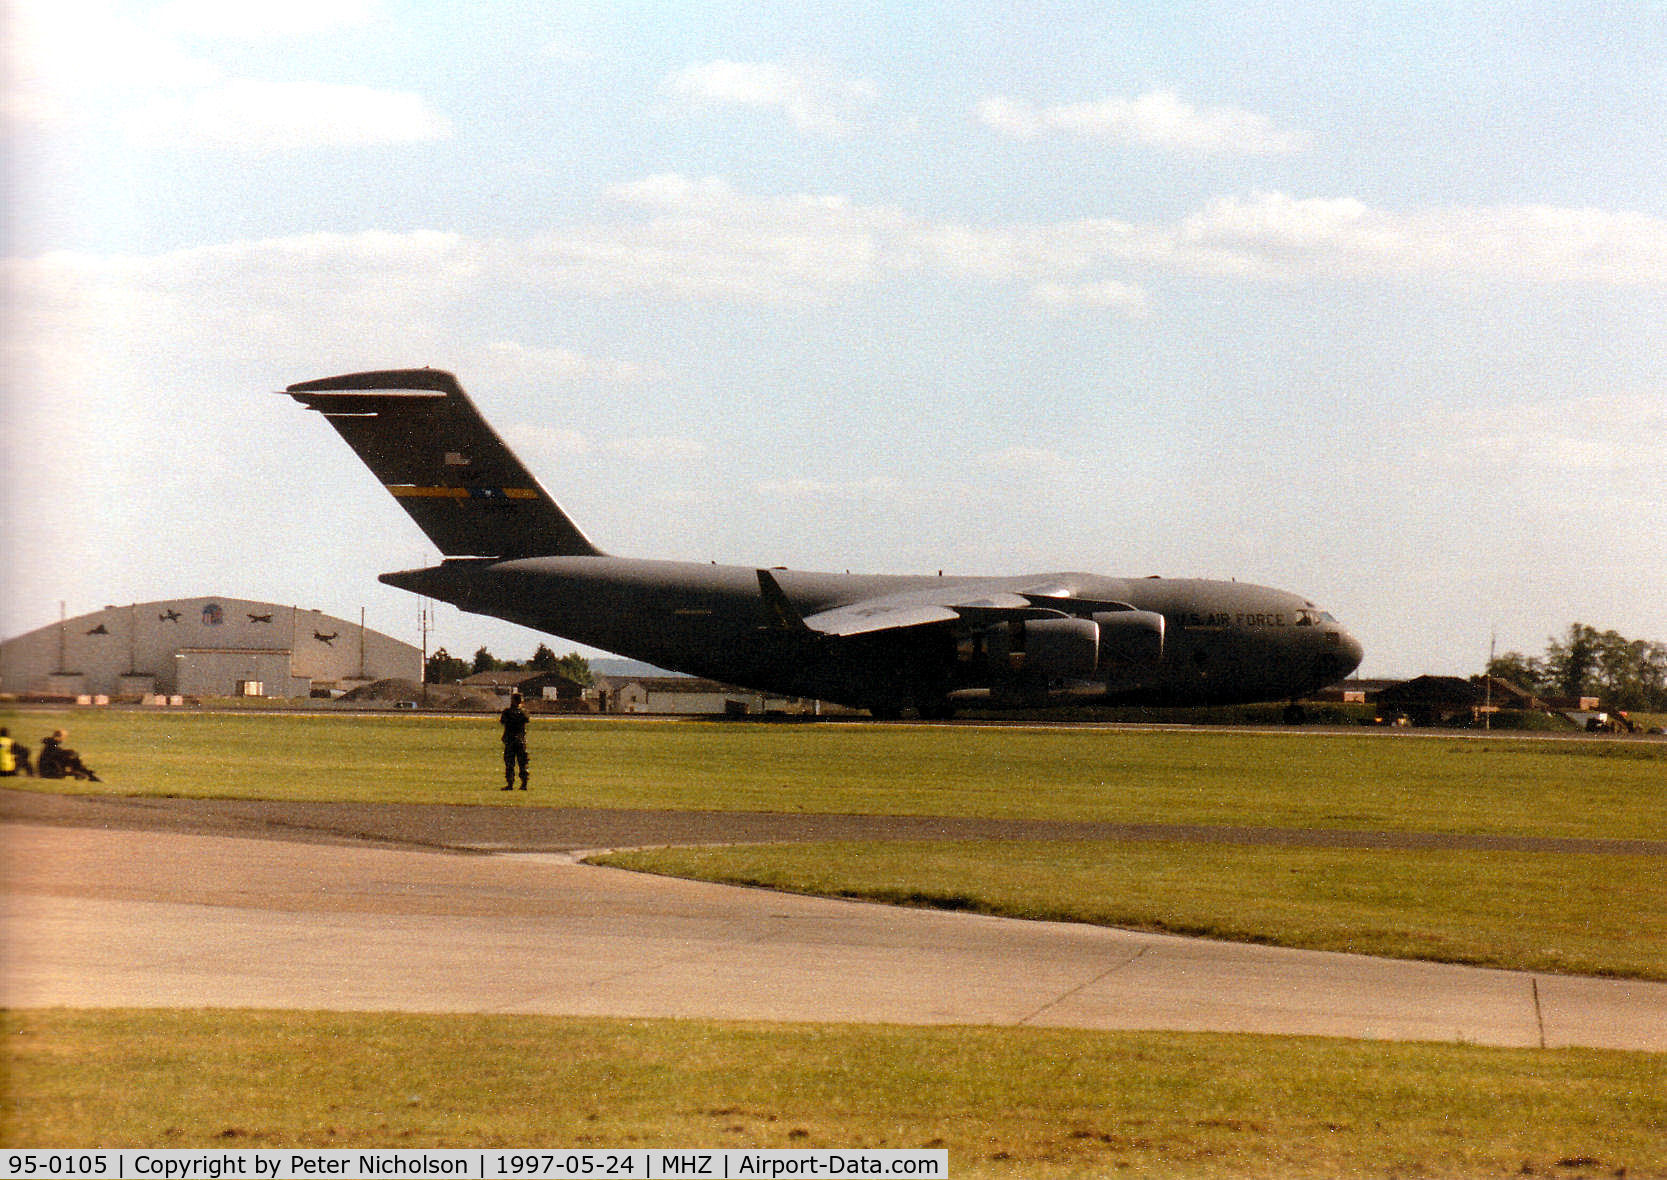 95-0105, 1995 McDonnell Douglas C-17A Globemaster III C/N P-30, C-17A Globemaster, callsign Reach 5105, of the 437th Airlift Wing at Charleston AFB taxying at the 1997 RAF Mildenhall Air Fete.